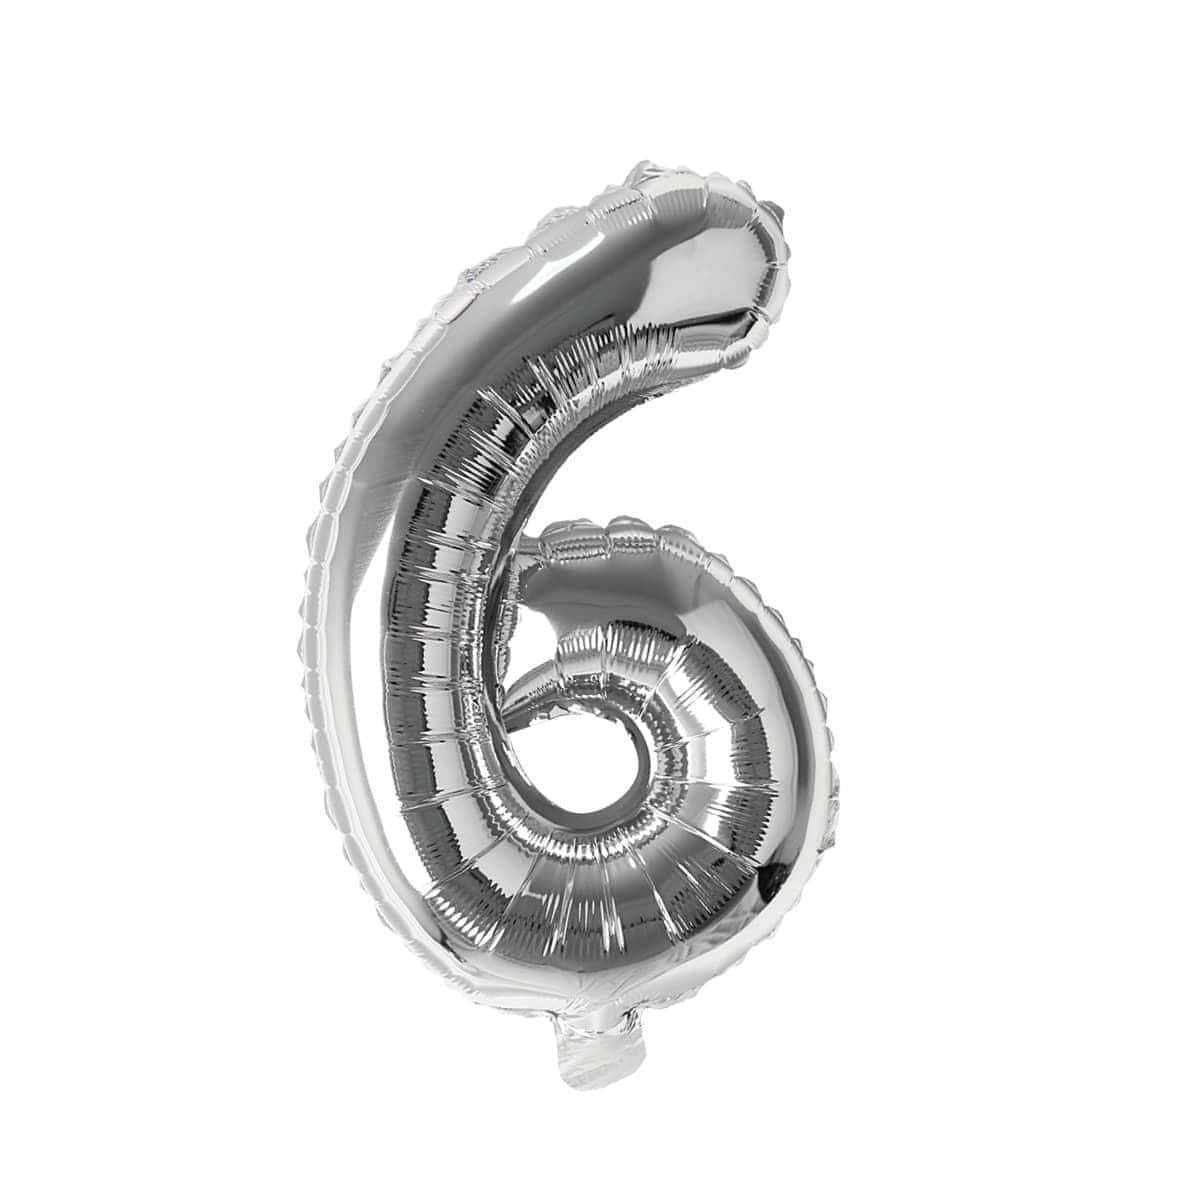 Buy Balloons Silver Number 6 Foil Balloon, 16 Inches sold at Party Expert